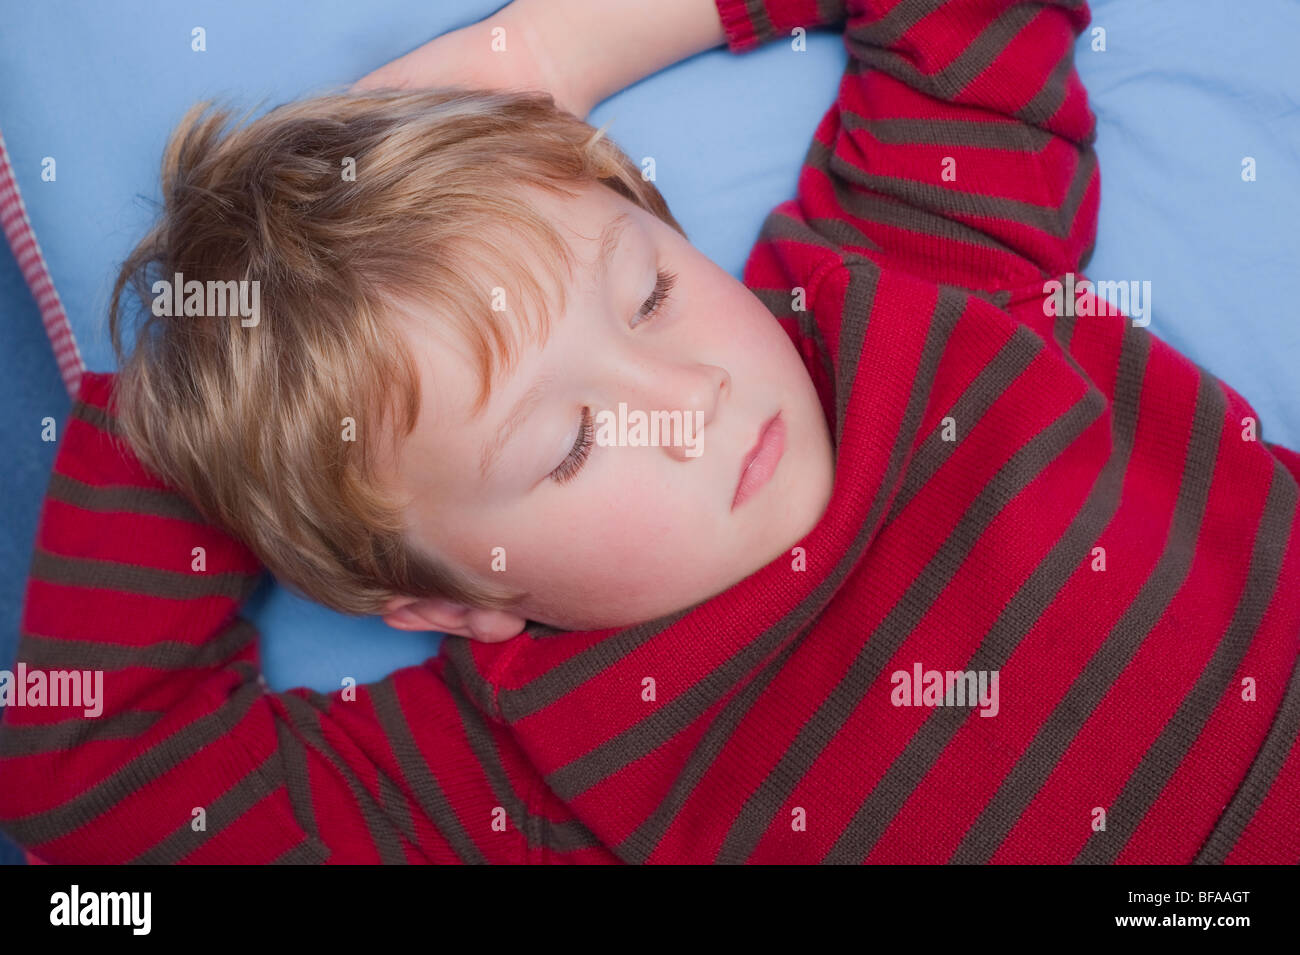 A Model Released picture of a six year old boy watching TV indoors in the Uk Stock Photo